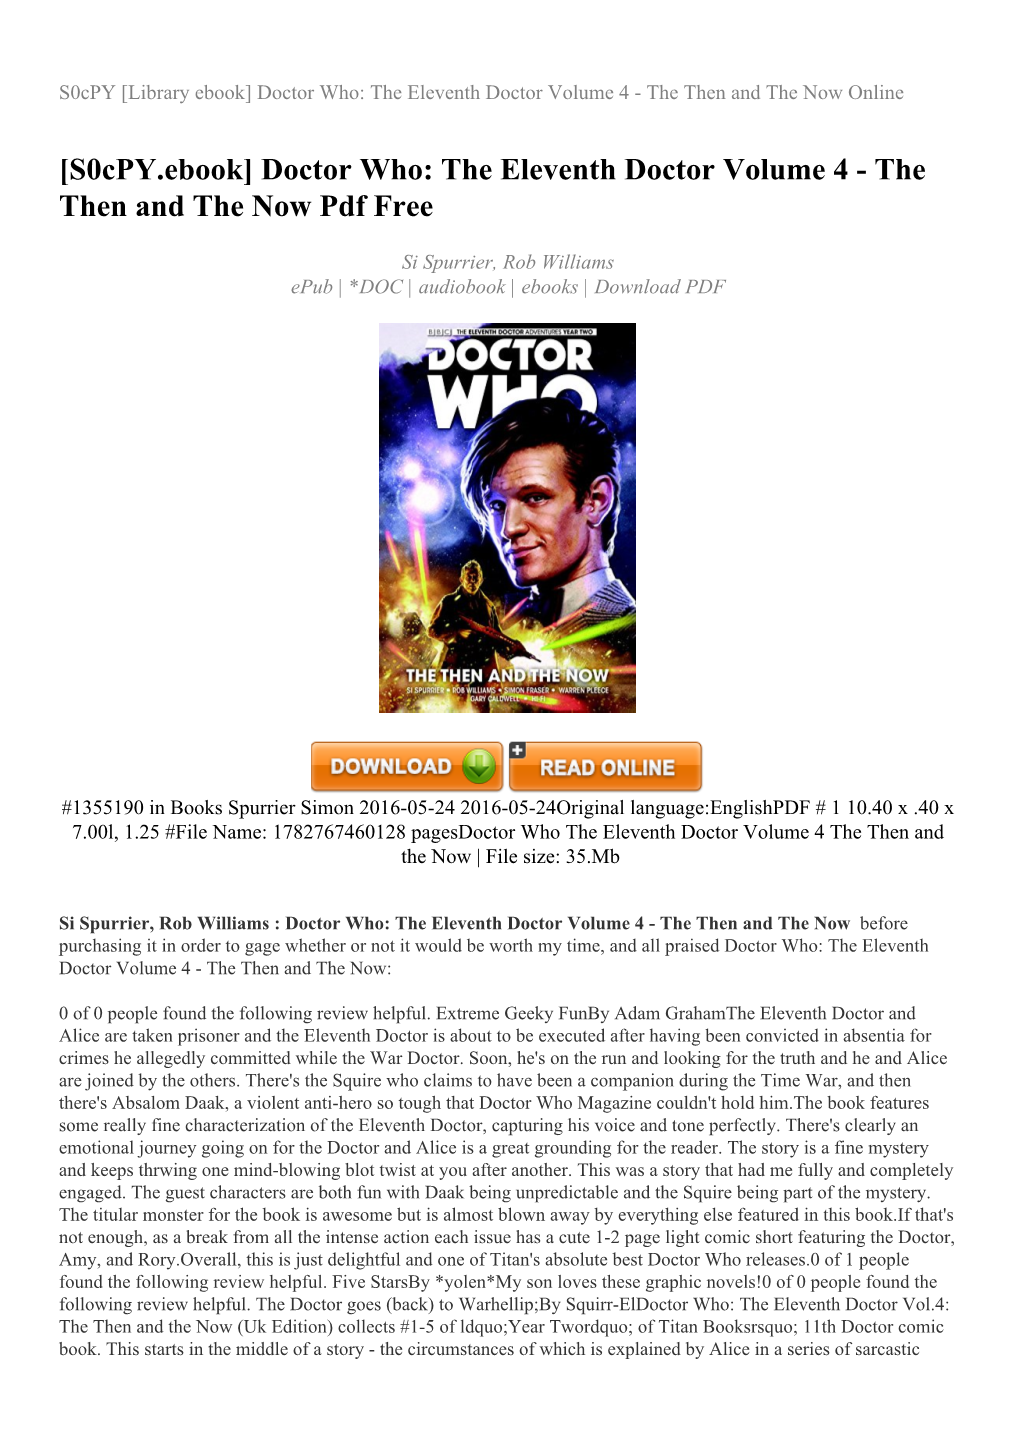 Doctor Who: the Eleventh Doctor Volume 4 - the Then and the Now Online